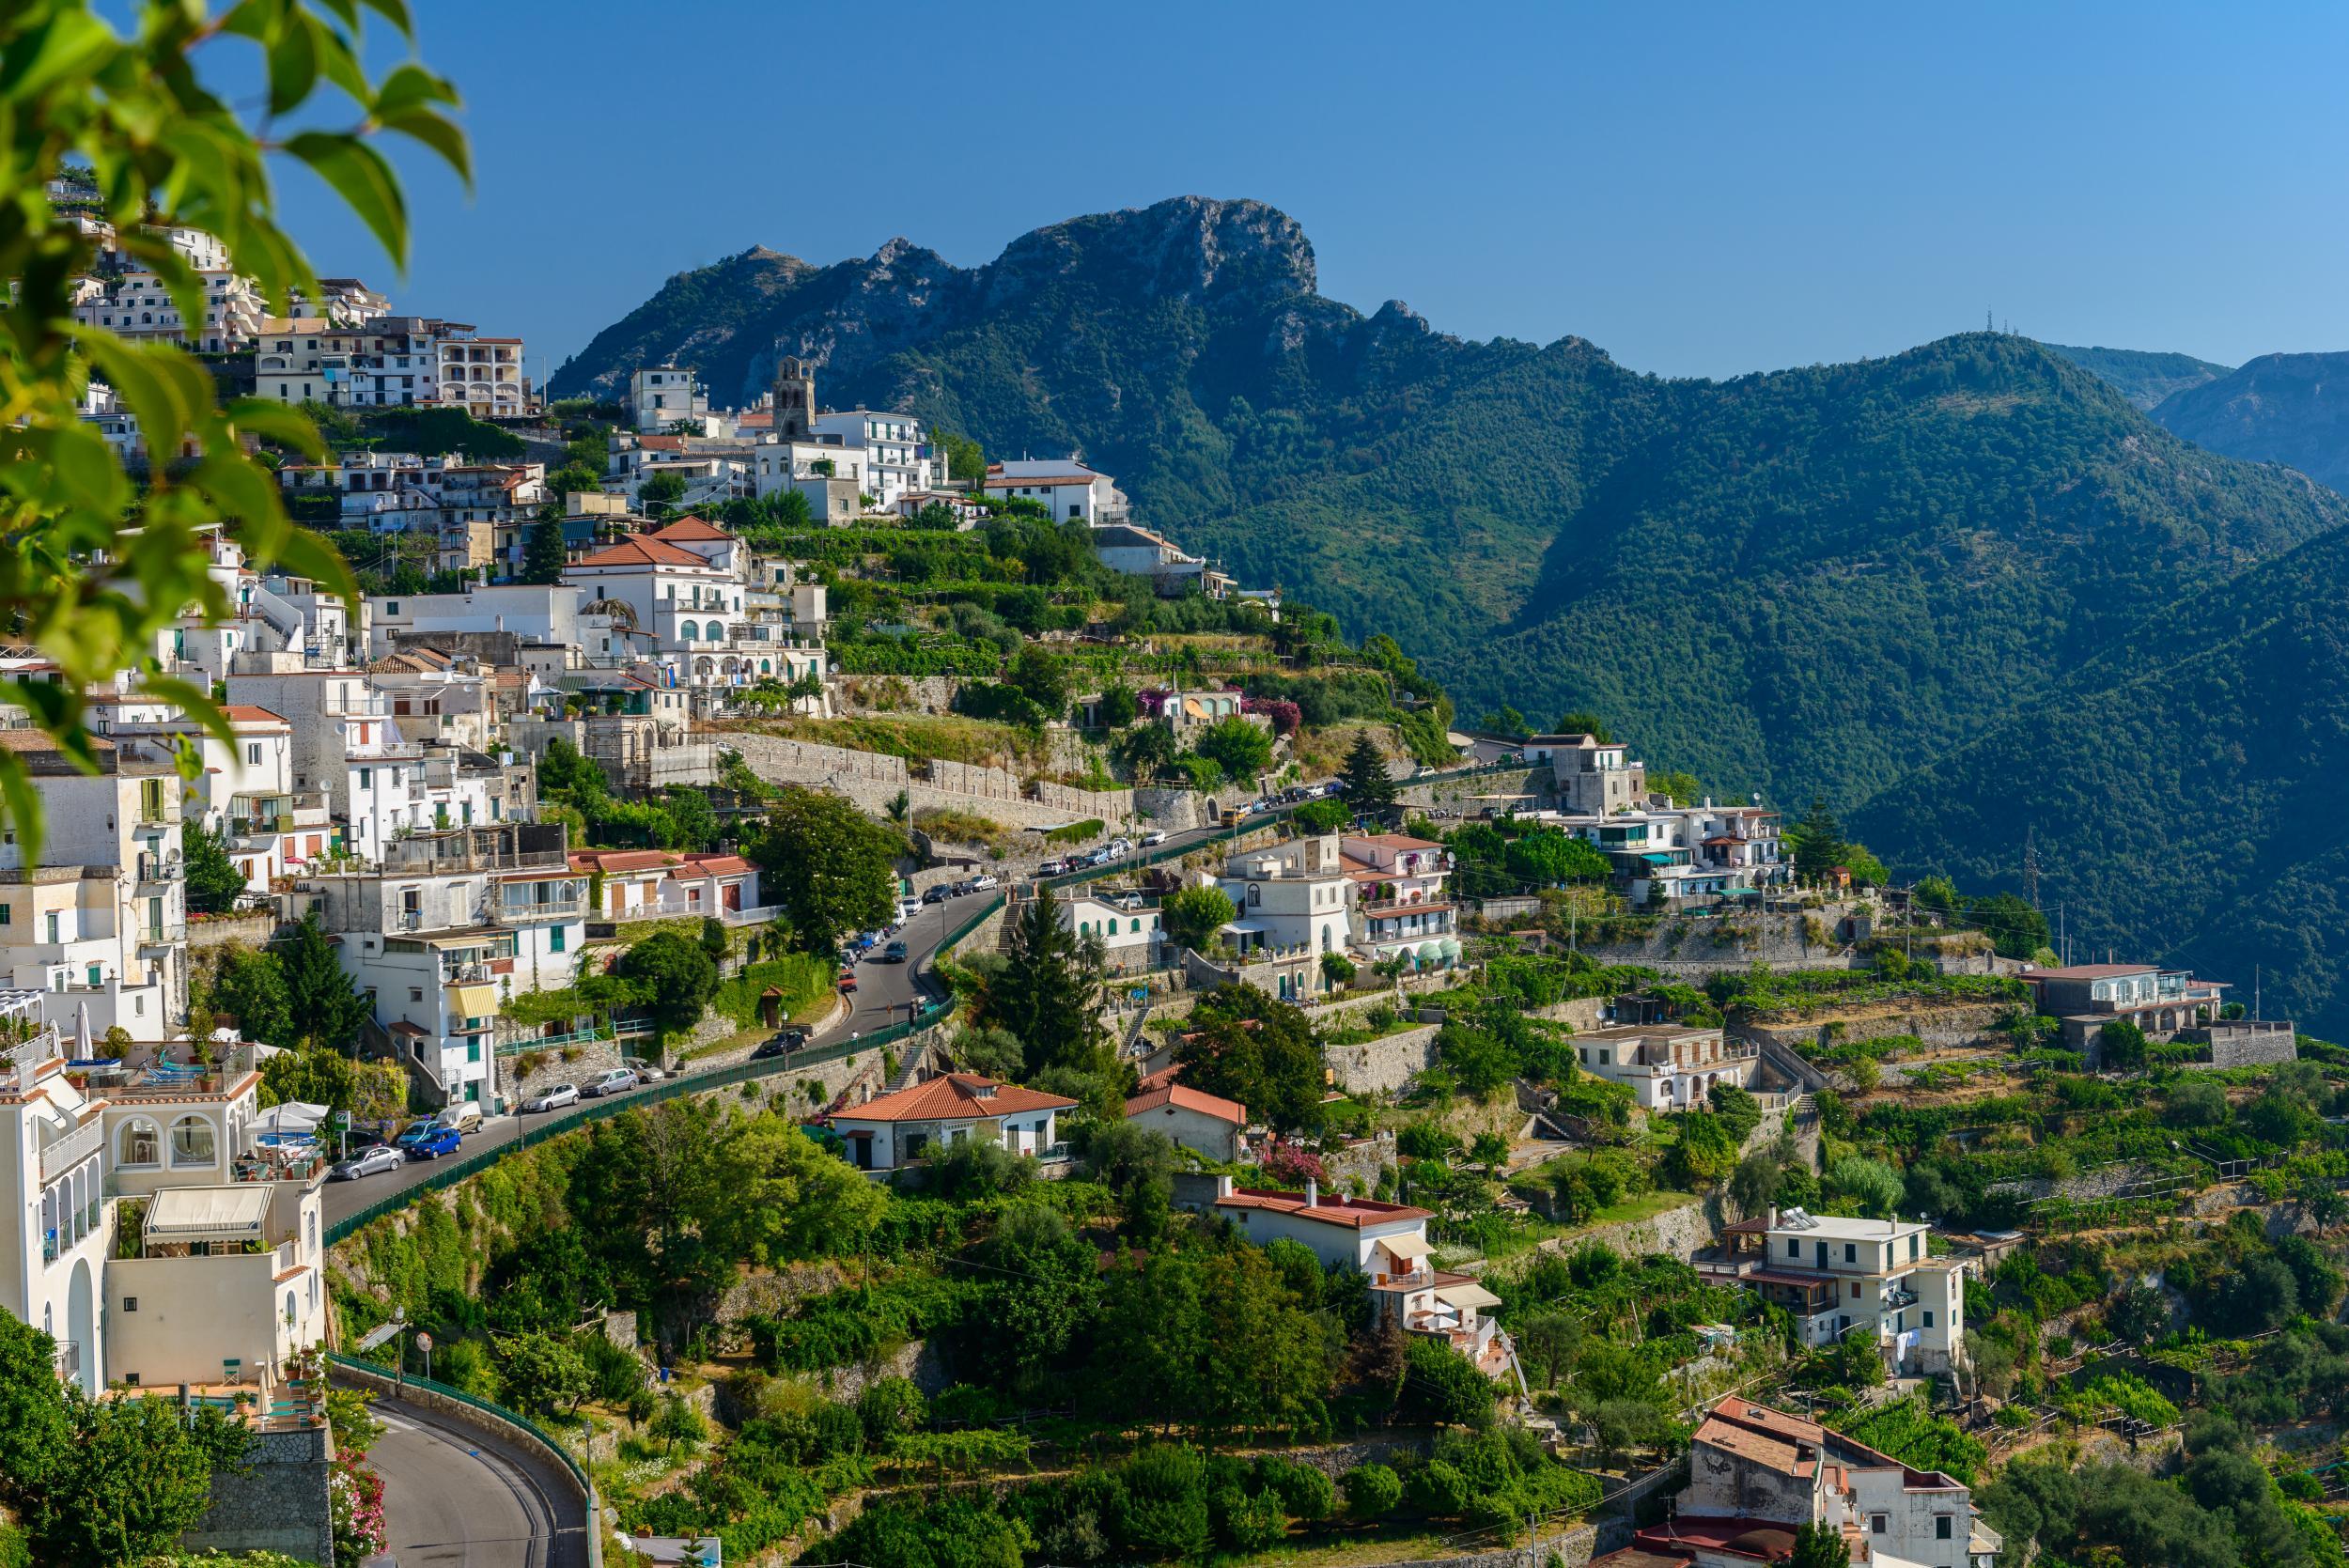 The scenic agricultural terraces surrounding Ravello